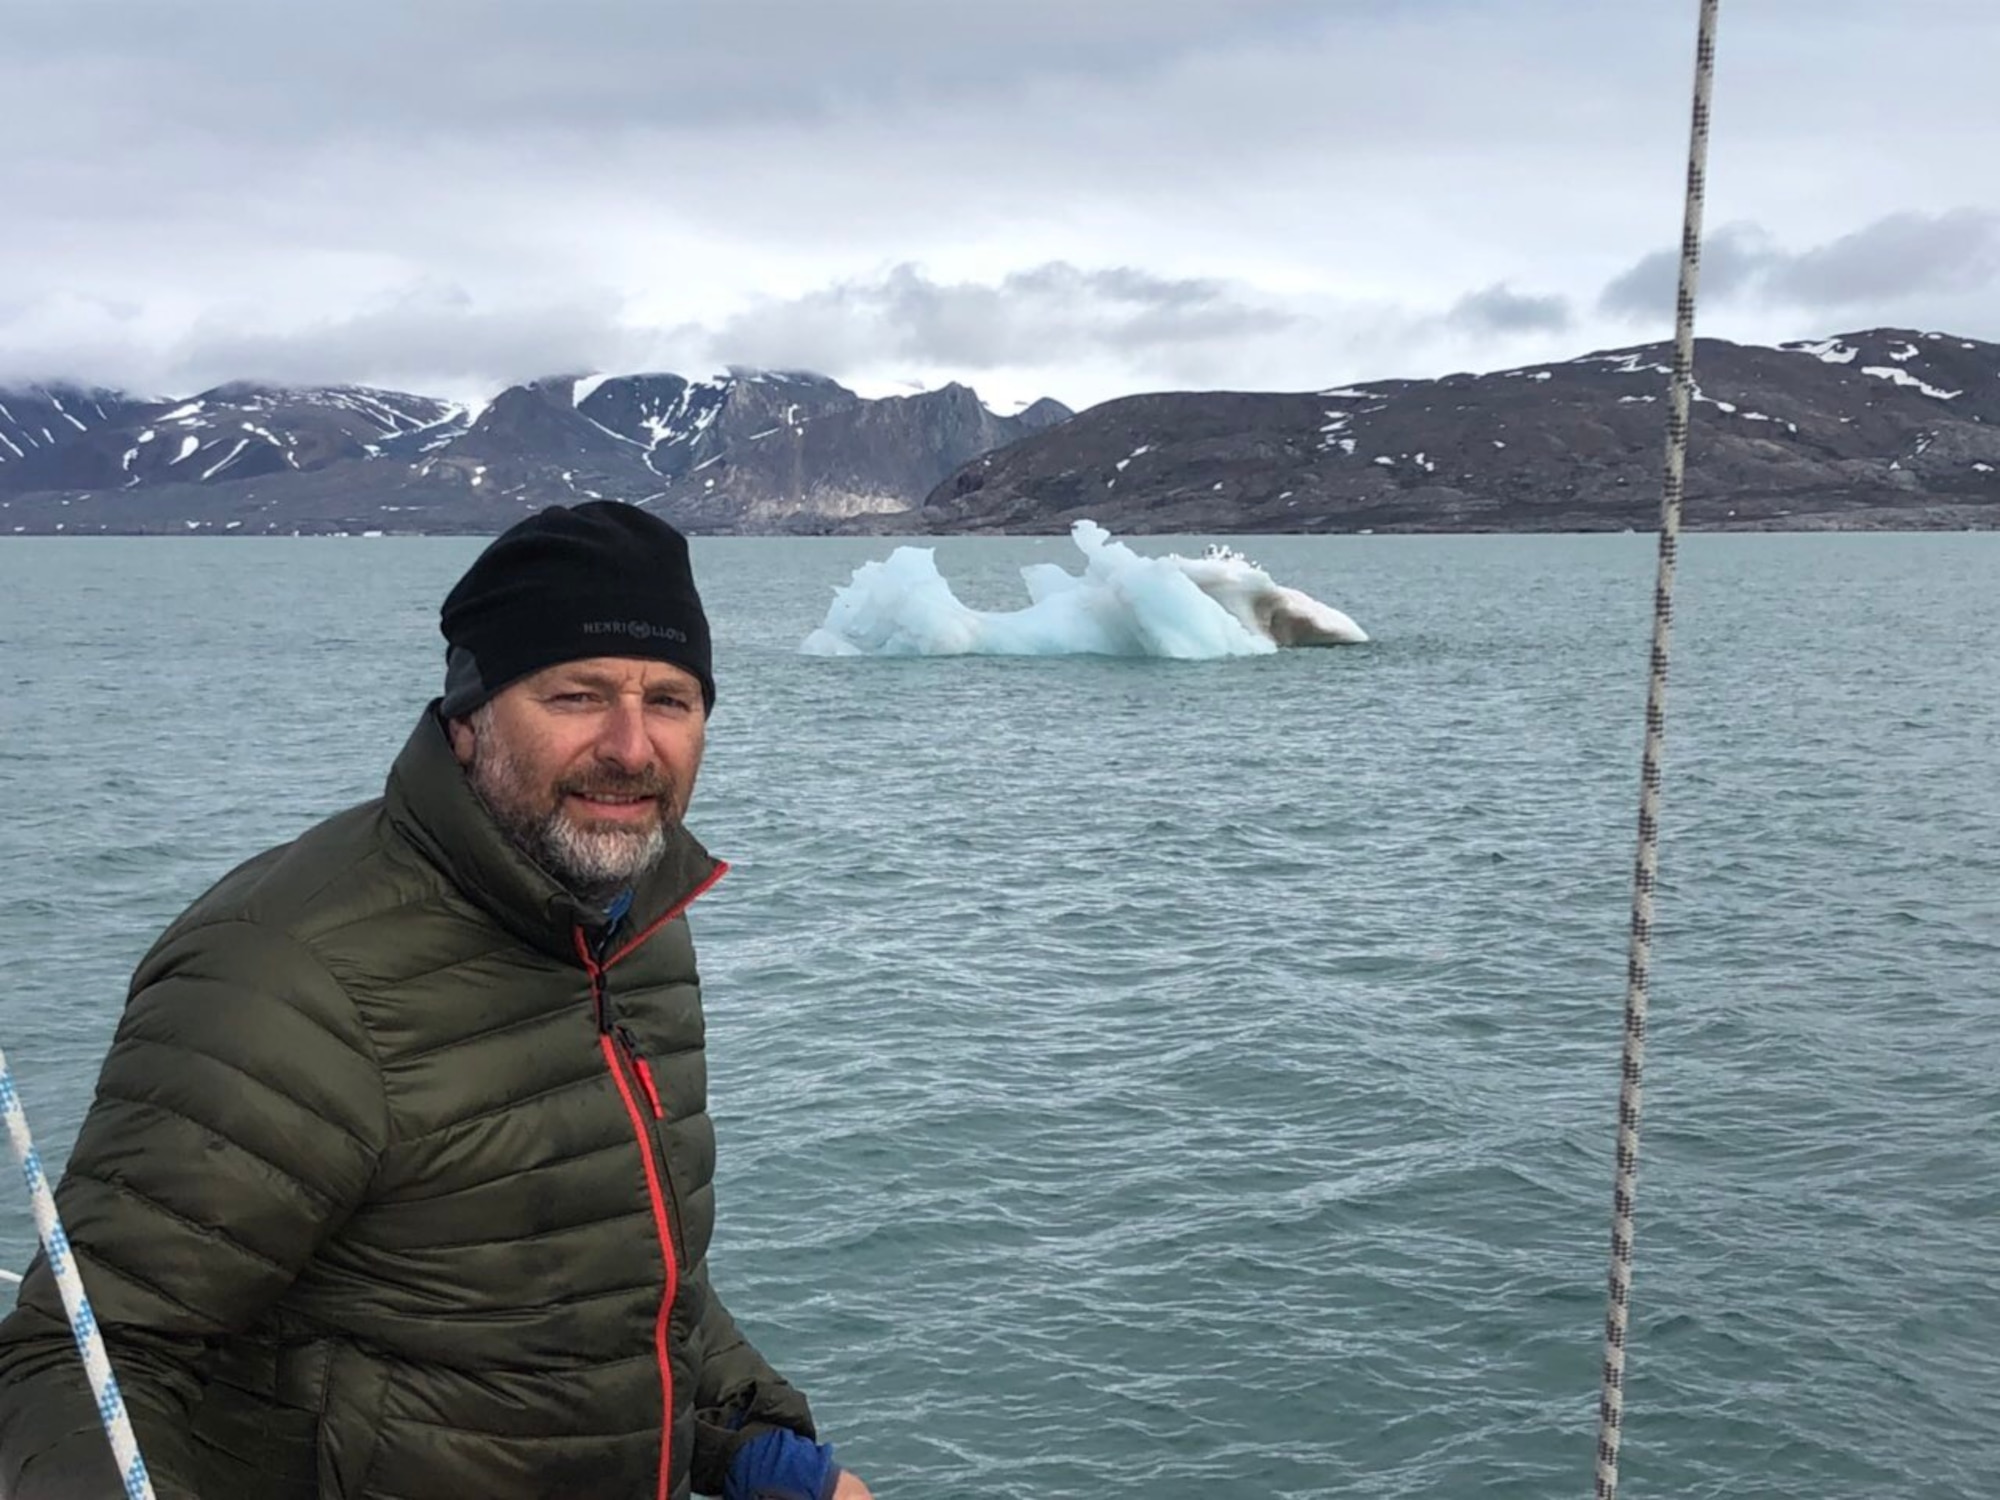 Mr. Stephen Skinner poses on the deck of his sailboat, while sailing to island of Svalbard, north of the Arctic Circle.